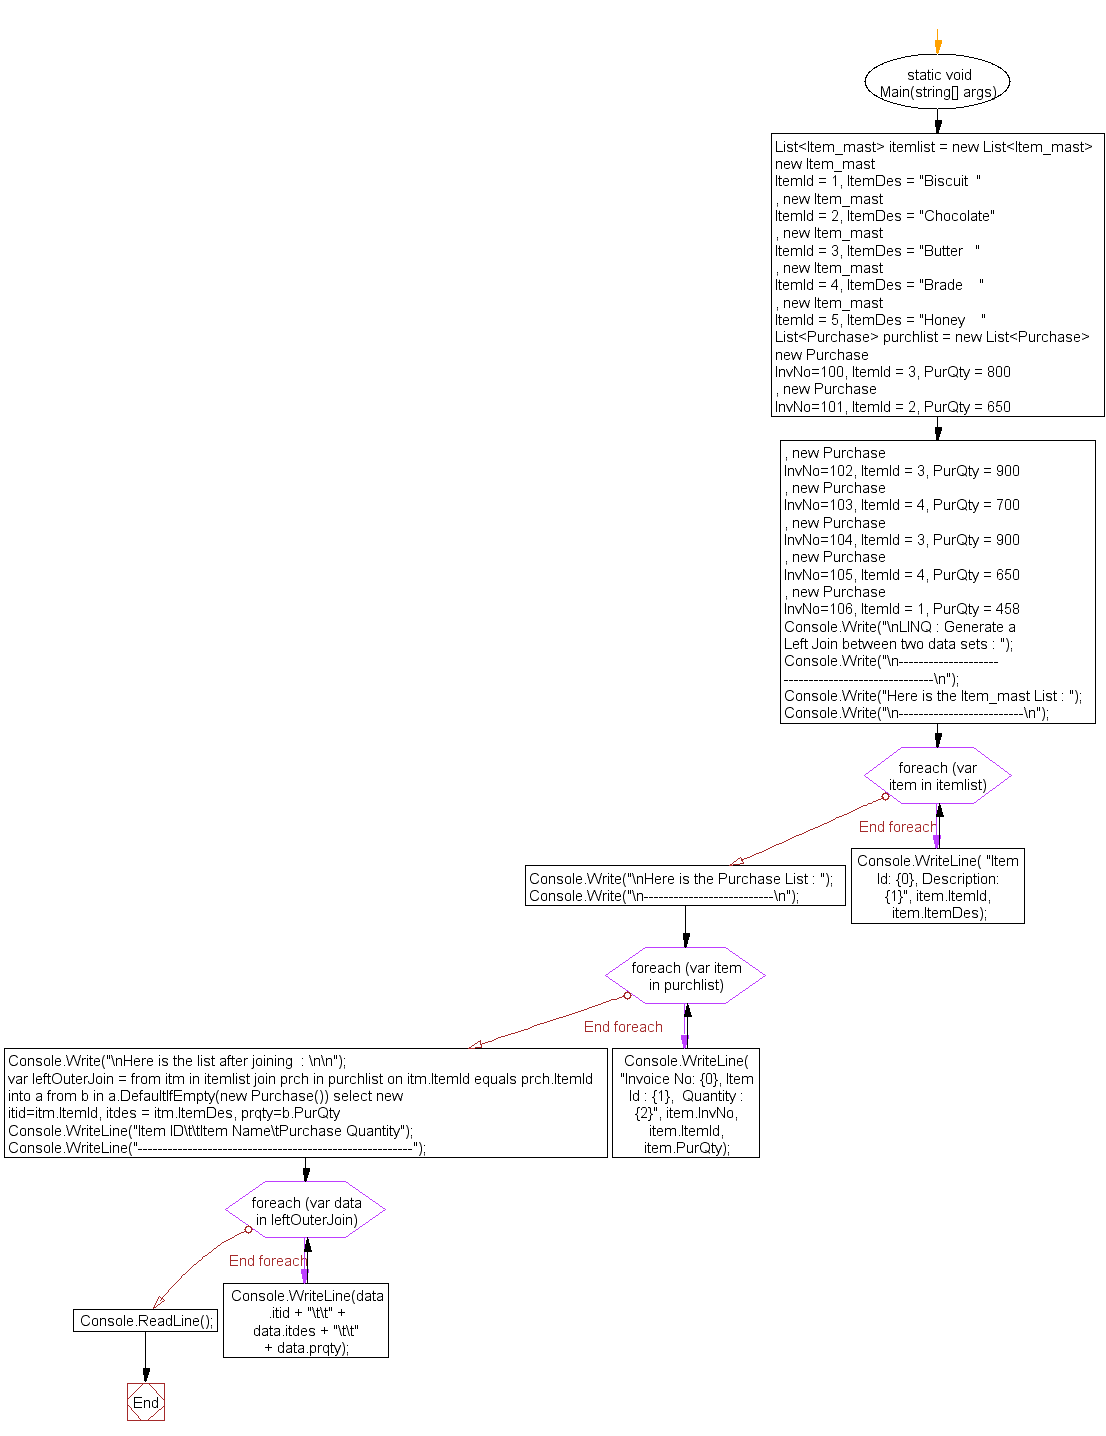 Flowchart: LINQ : Generate a Left Join between two data sets 